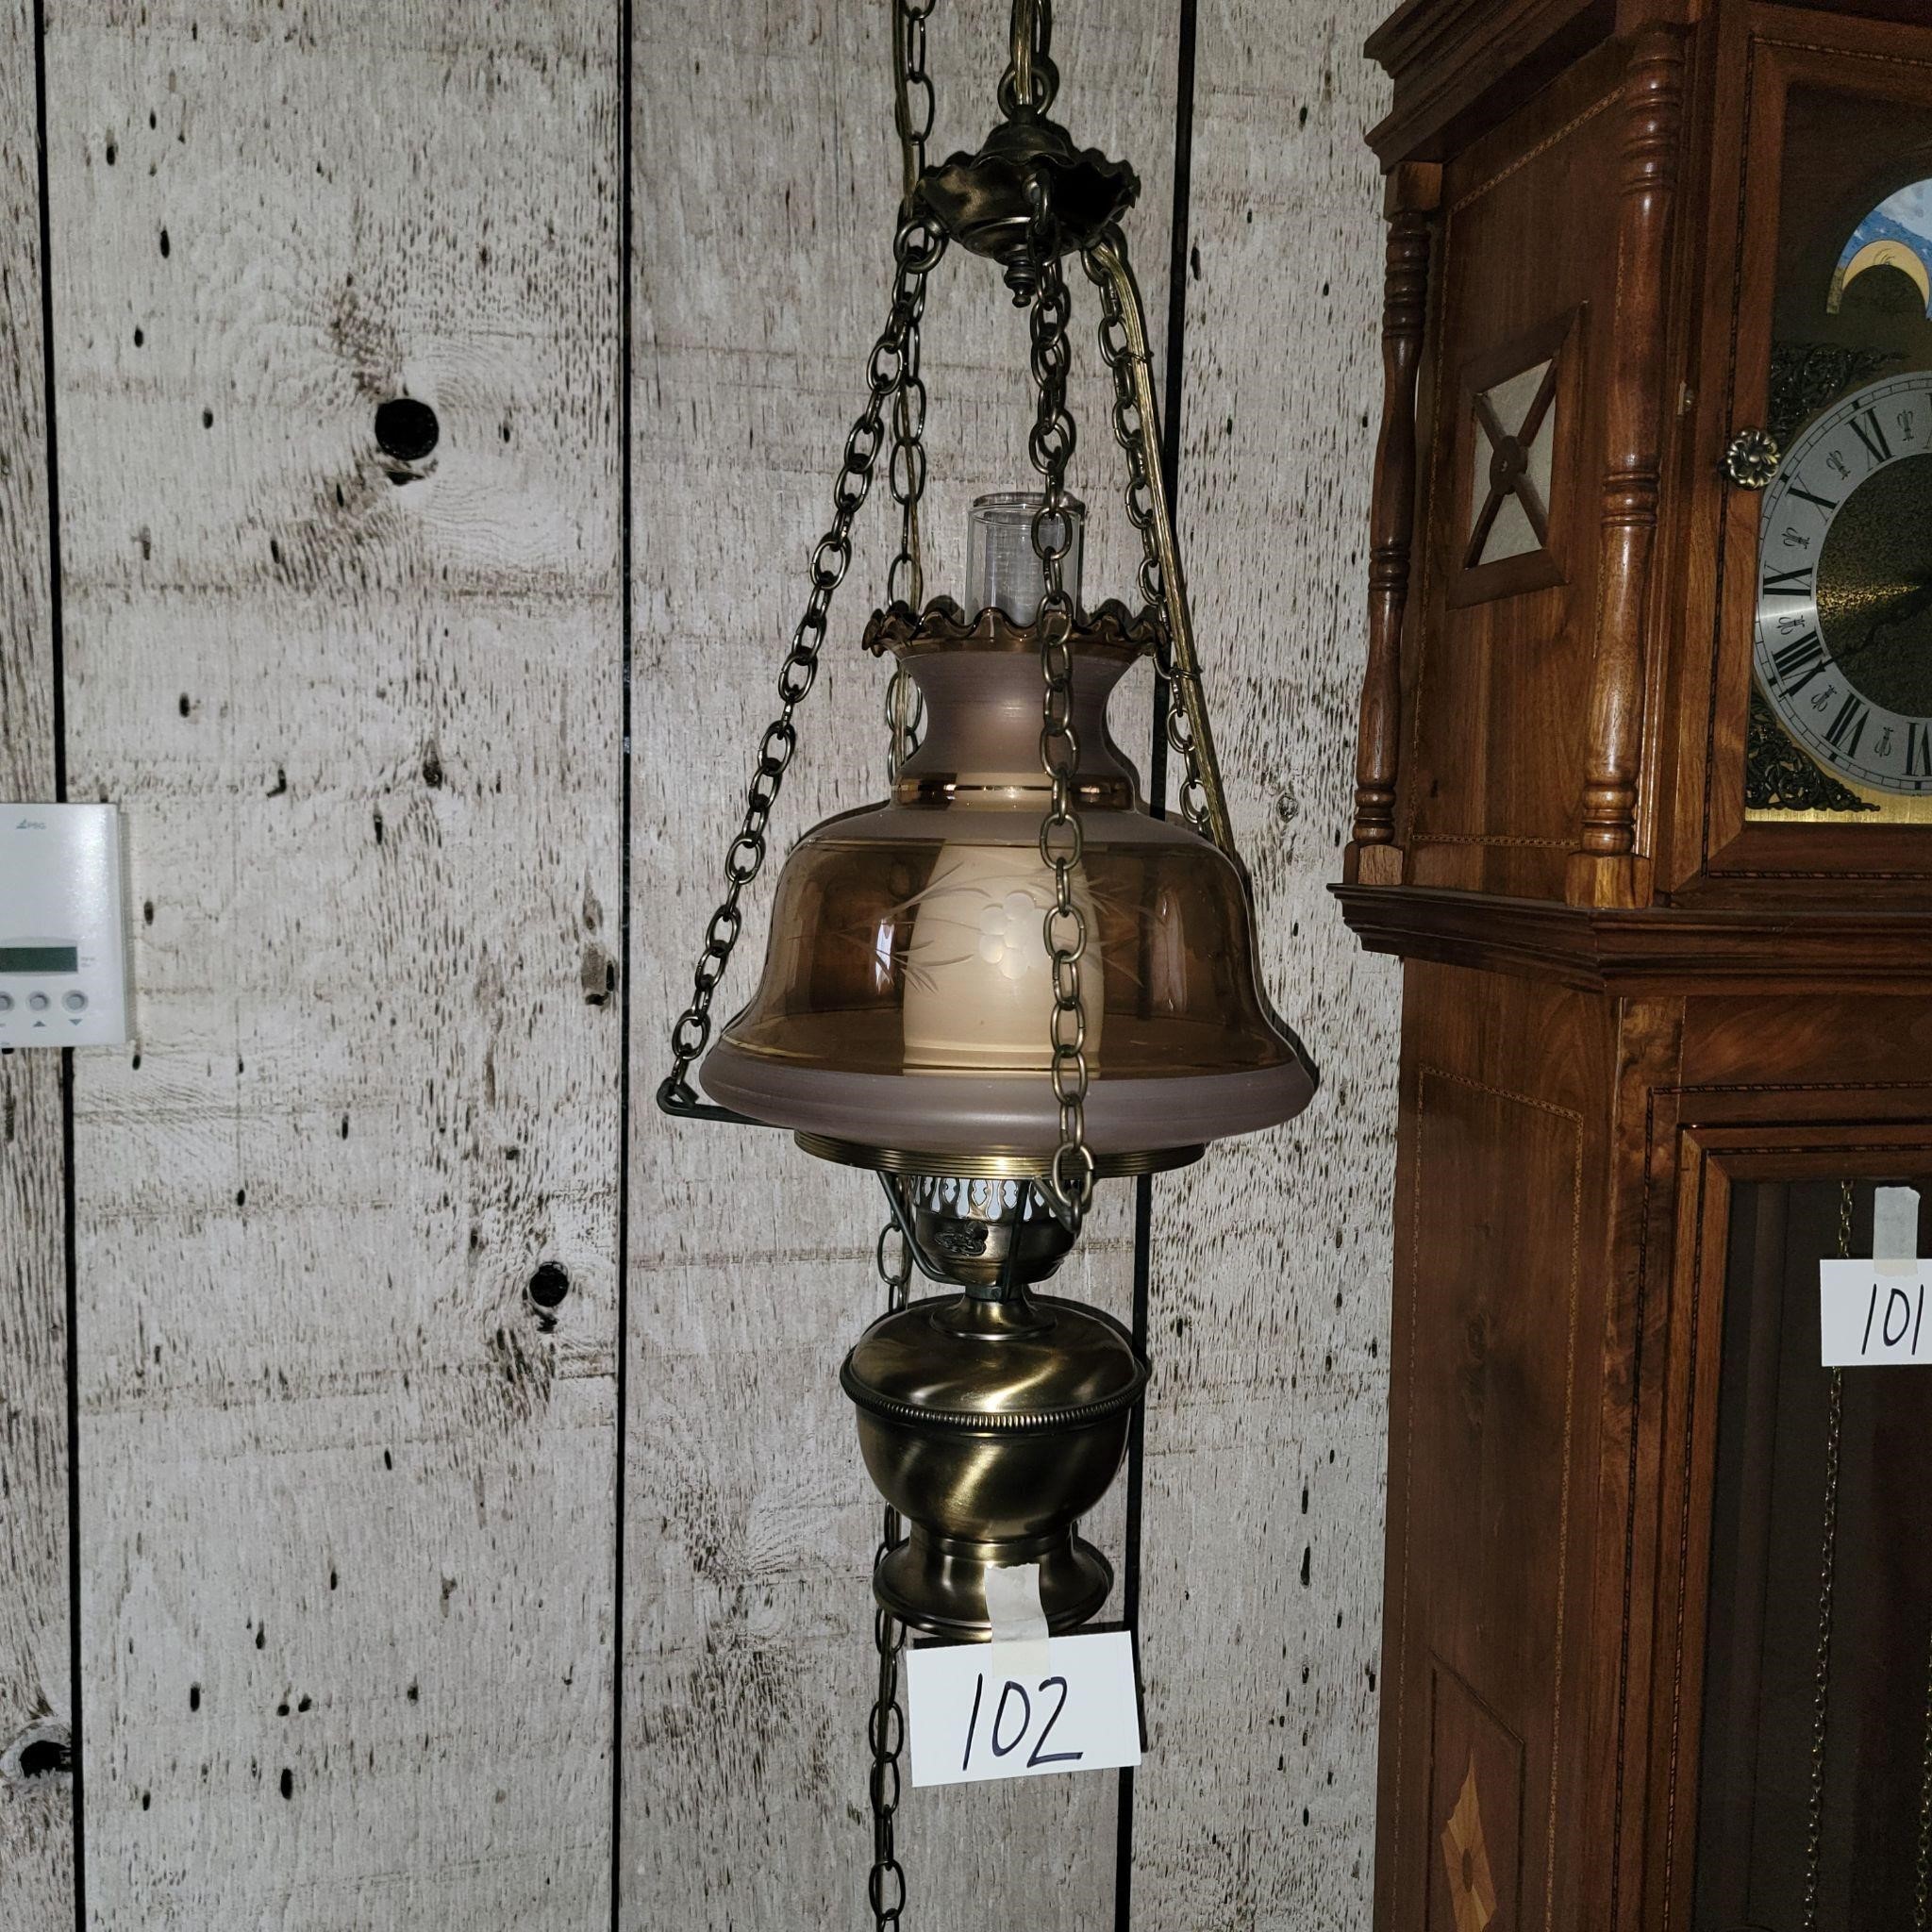 Hanging Brass Light with a long chained cord